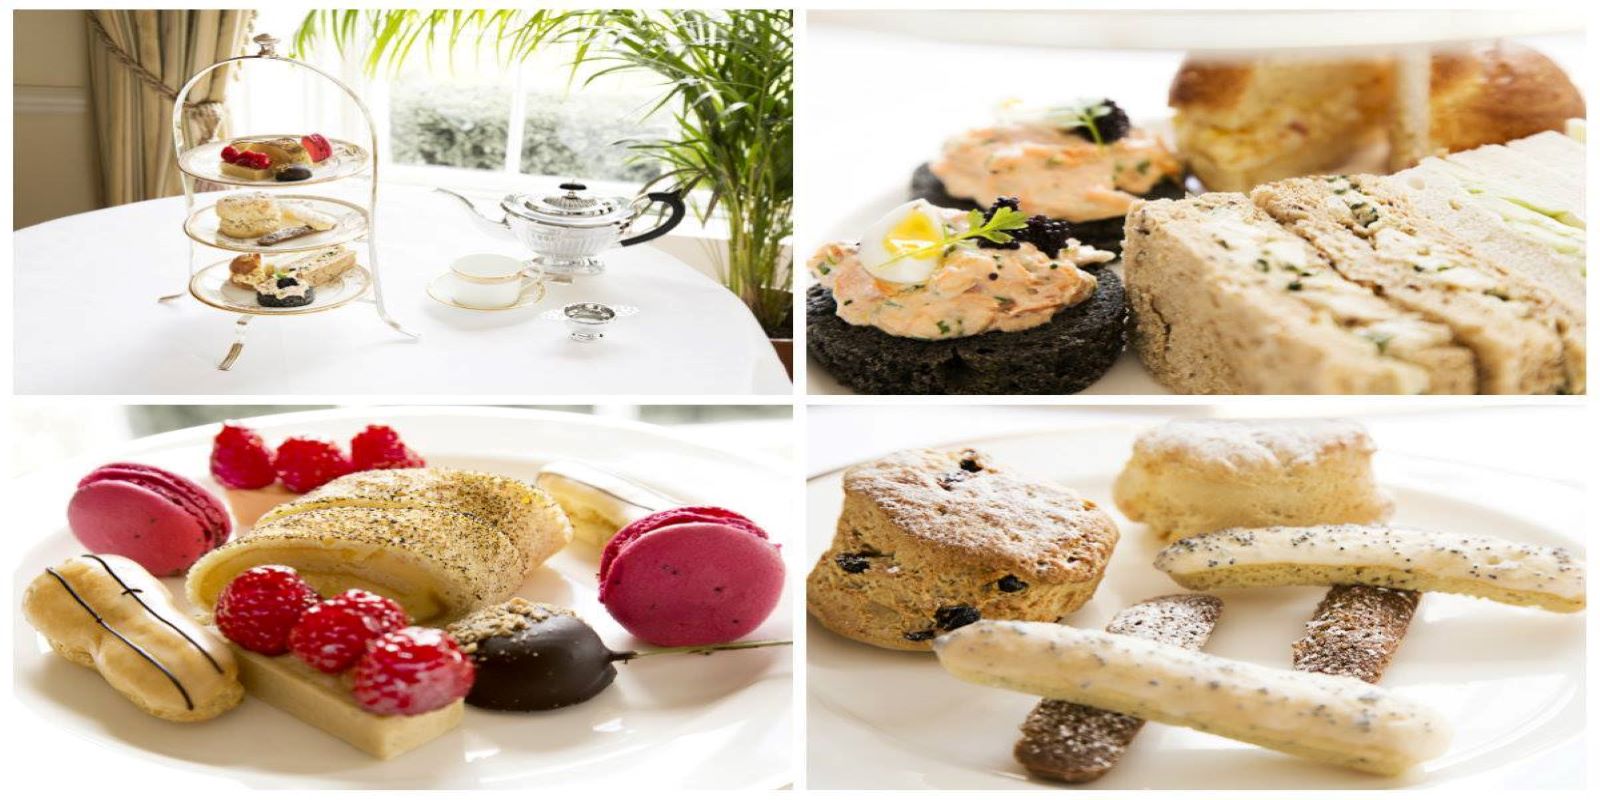 Taste the freshly baked scones served with clotted cream and preserves at Lady Fitzgerald’s Afternoon Tea.